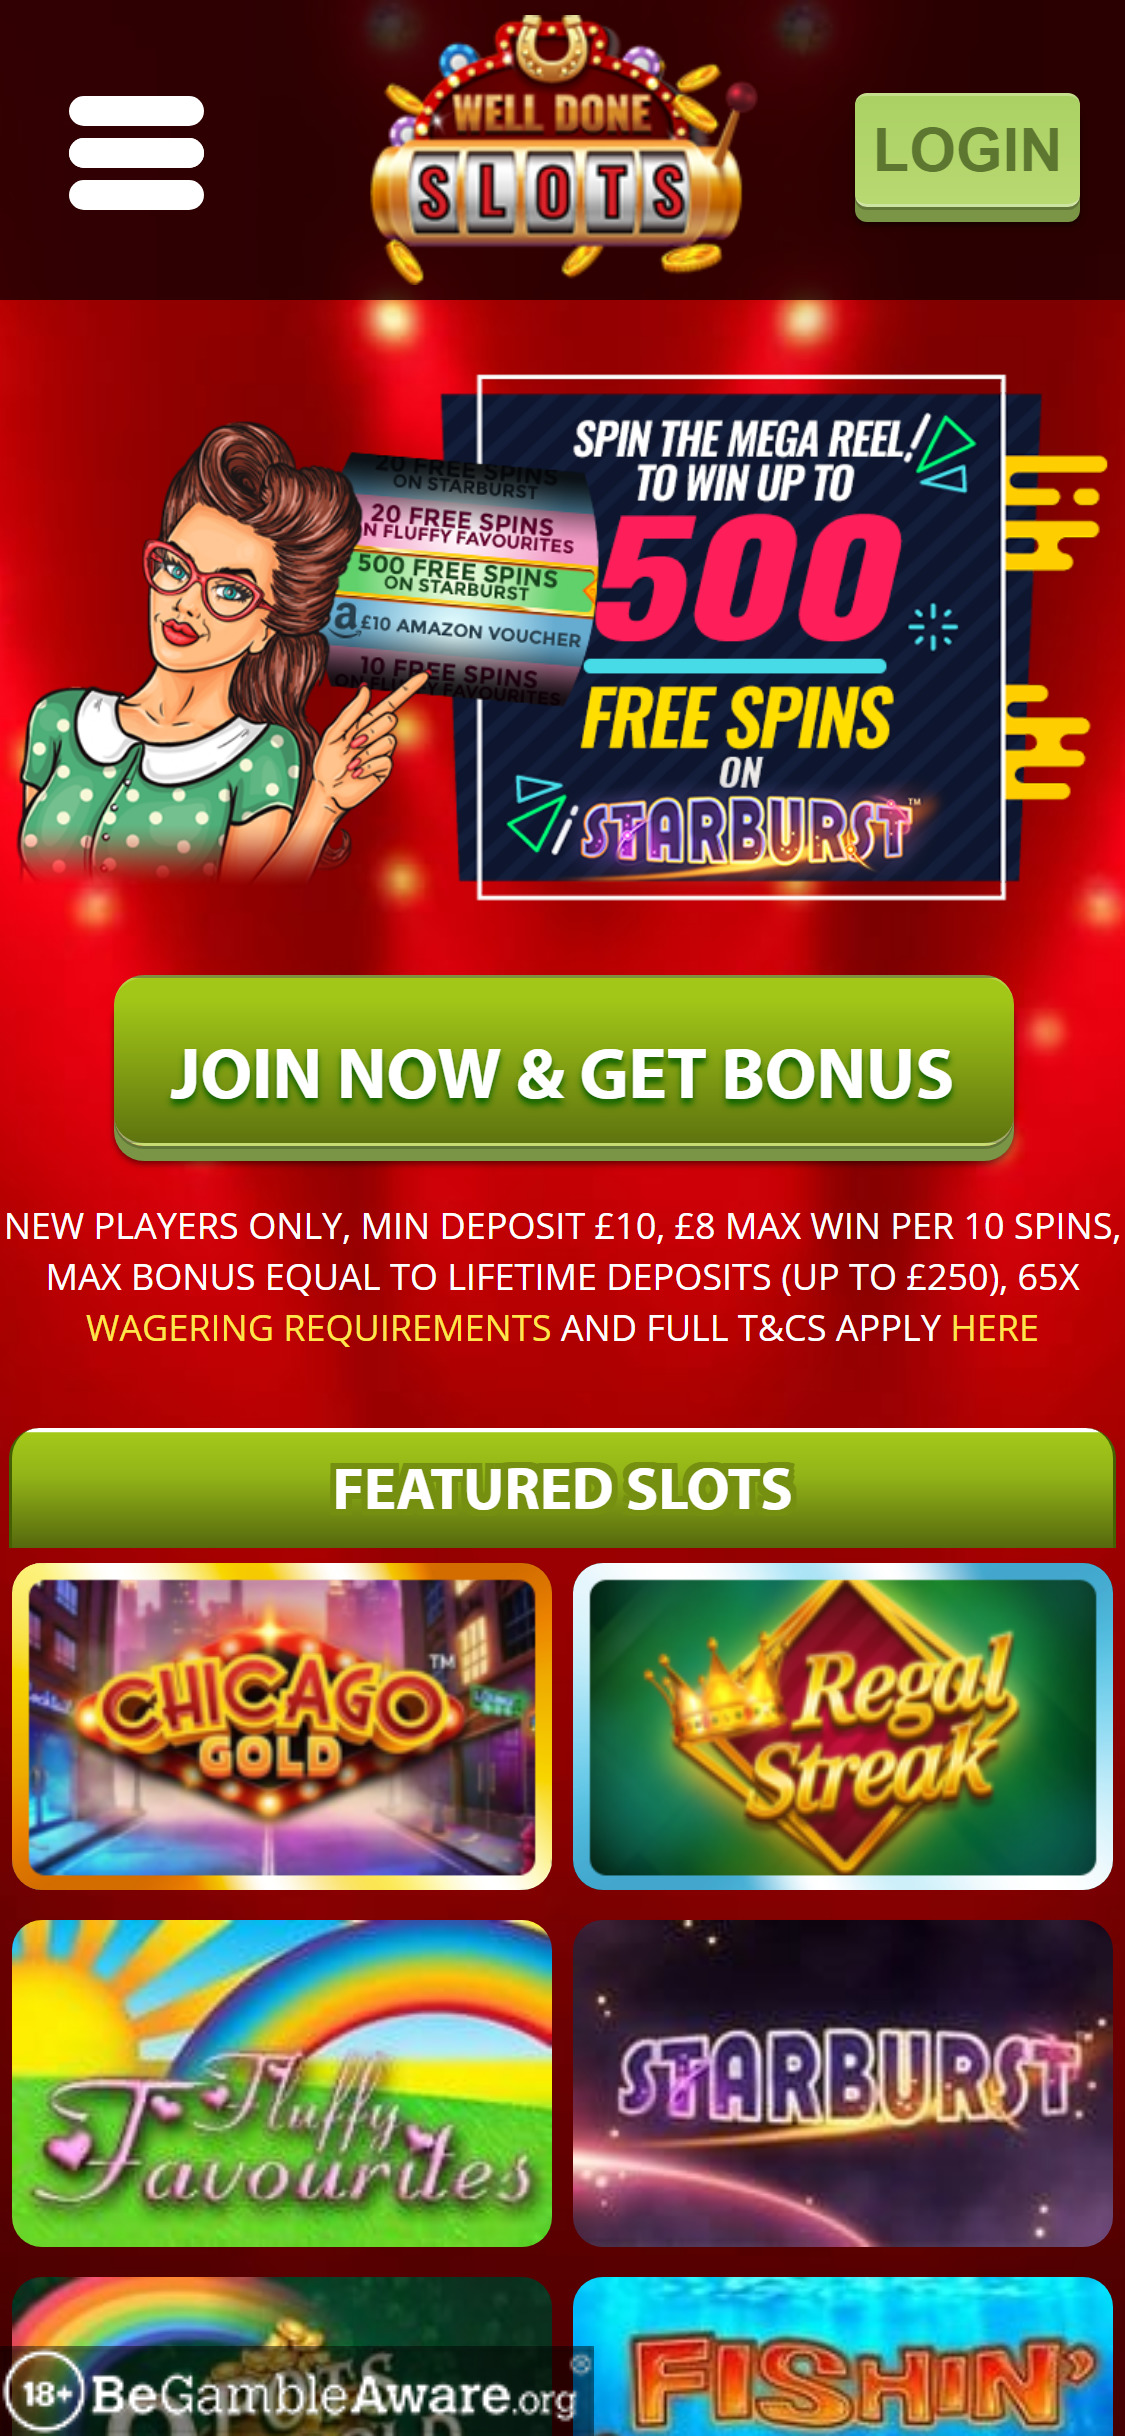 Well Done Slots Casino Mobile Review